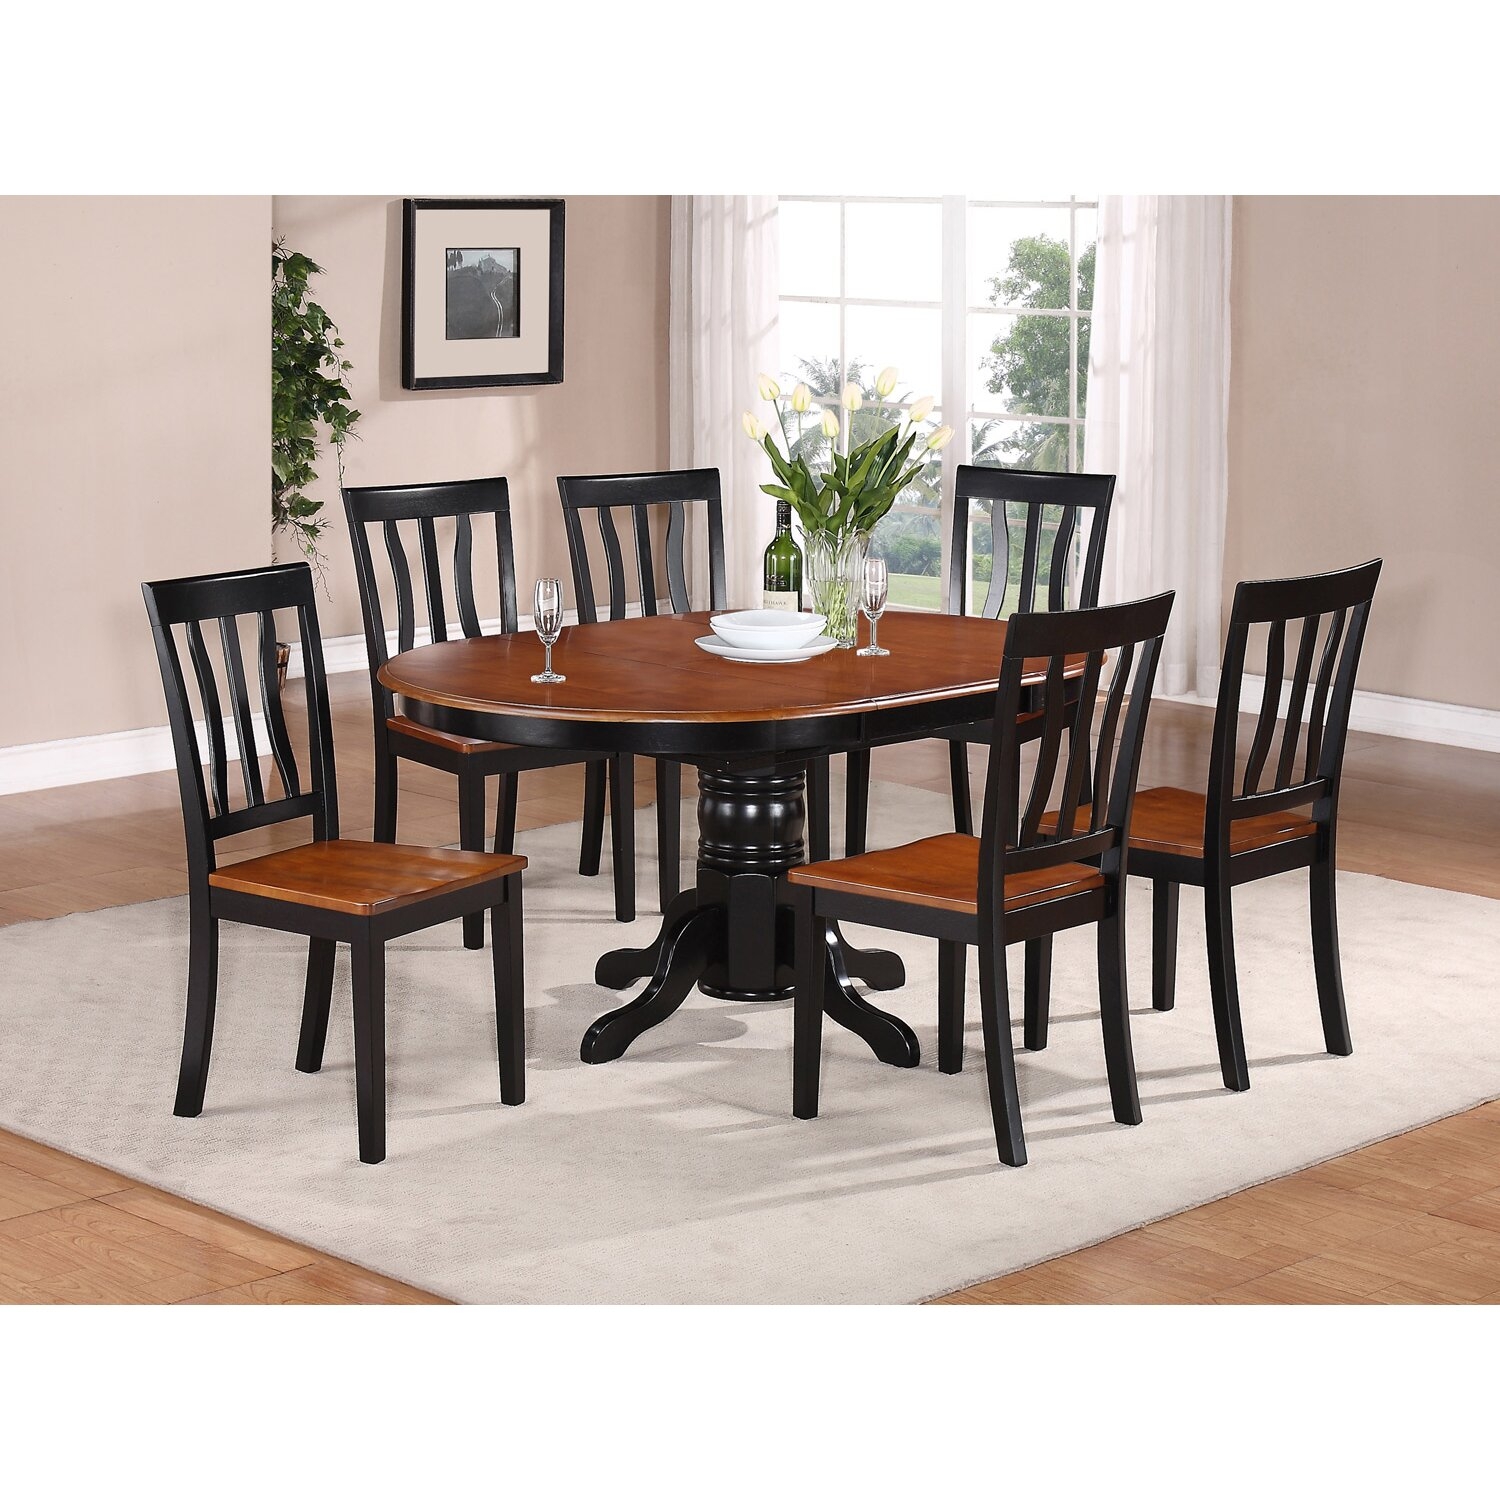 7 Pc Oval Dinette Kitchen Dining Set Table W 6 Wood Seat Chairs In Black Cherry